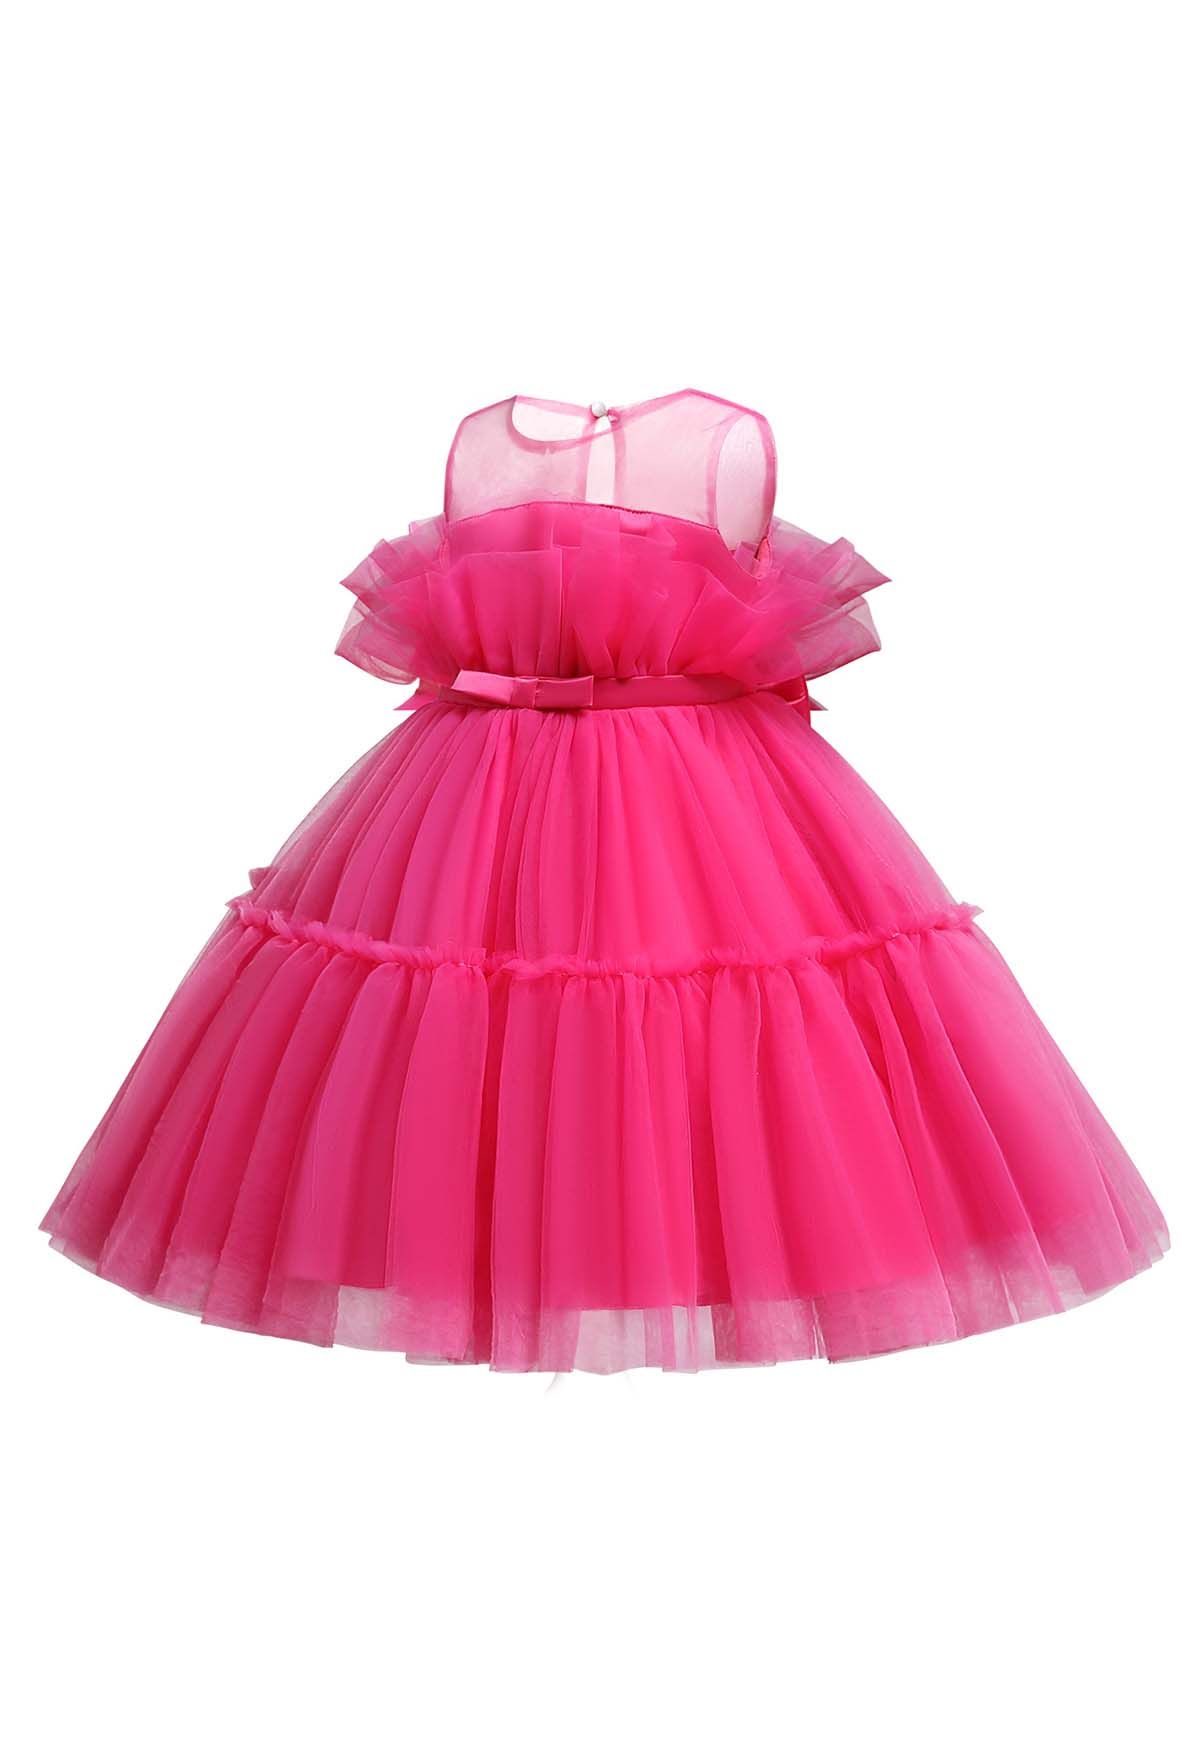 Bowknot Waist Tulle Dress in Magenta for Kids